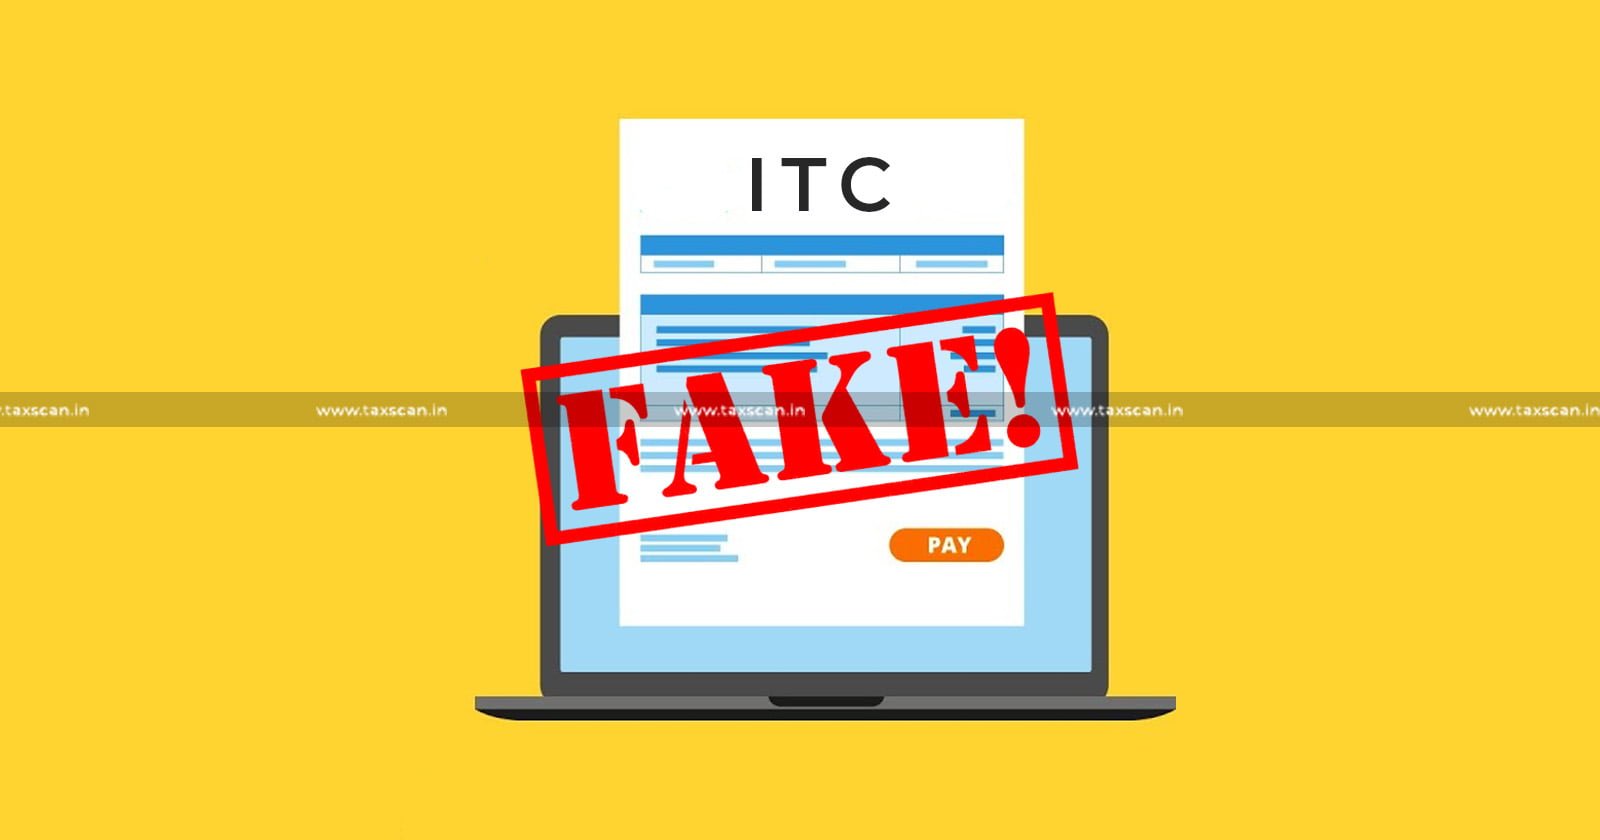 GST - Pune GST department - Fake ITC Claims - Pune GST Scam - Input Tax Credit Fraud - taxscan